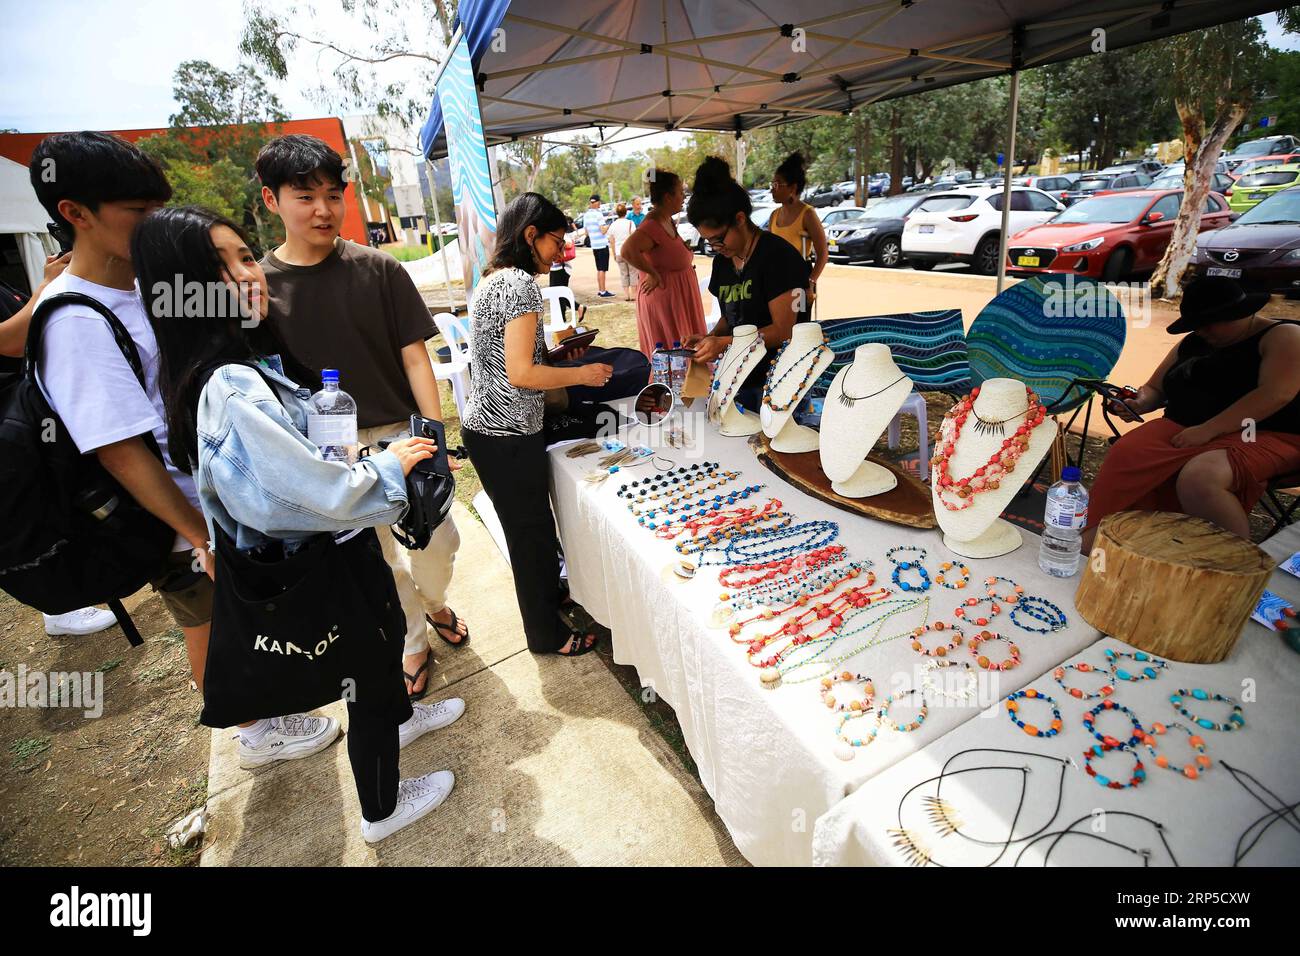 (181209) -- CANBERRA, Dec. 9, 2018 (Xinhua) -- People visit the Indigenous Art Market near National Museum in Canberra, Australia, on Dec. 8, 2018. The Indigenous Art Market was held here from Dec. 7 to Dec. 8, which gave an opportunity for people to encounter and engage in aboriginal culture and sought for support to aboriginal people in local and other communities. (Xinhua/Pan Xiangyue) (zxj) AUSTRALIA-CANBERRA-INDIGENOUS ART MARKET PUBLICATIONxNOTxINxCHN Stock Photo